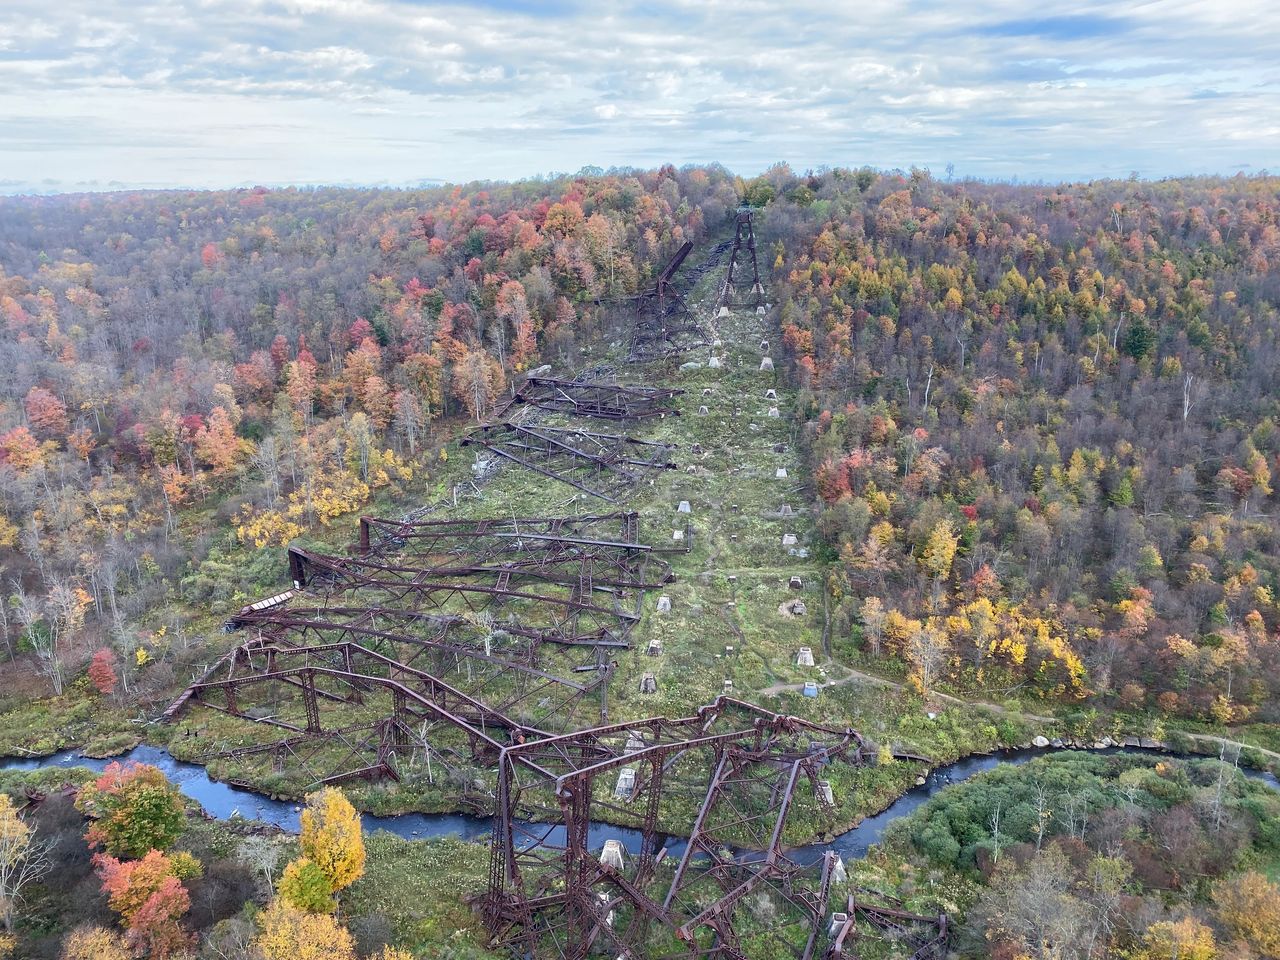 Wreckage of the old trestle